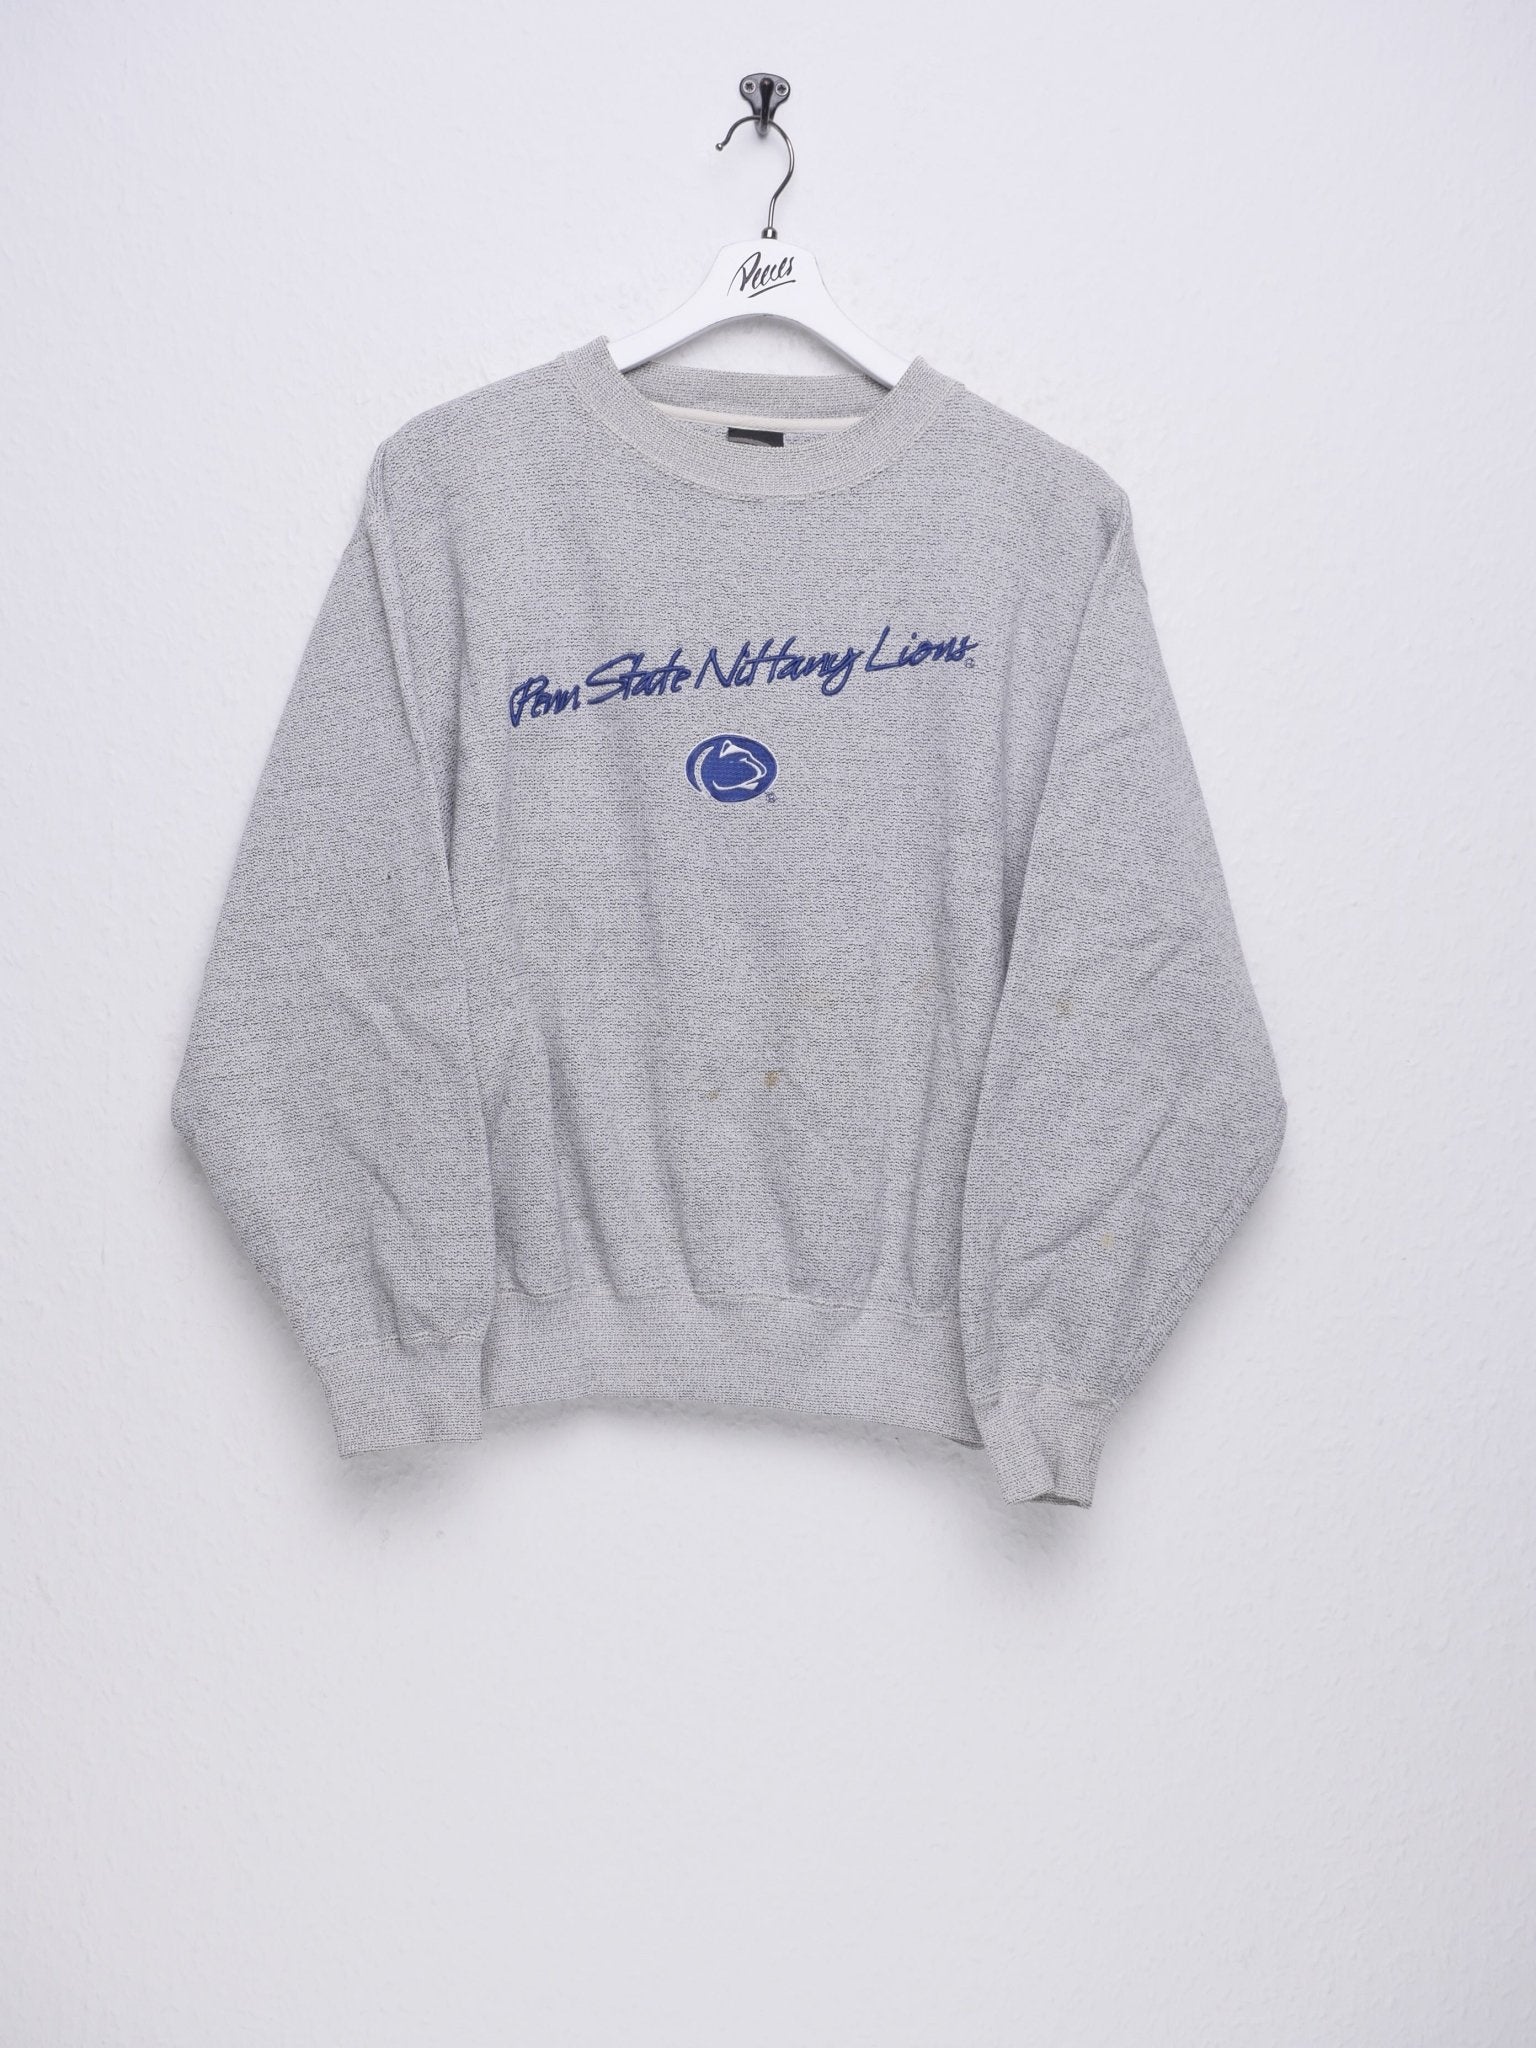 Penn State Nittany Lions embroidered Logo grey Sweater - Peeces